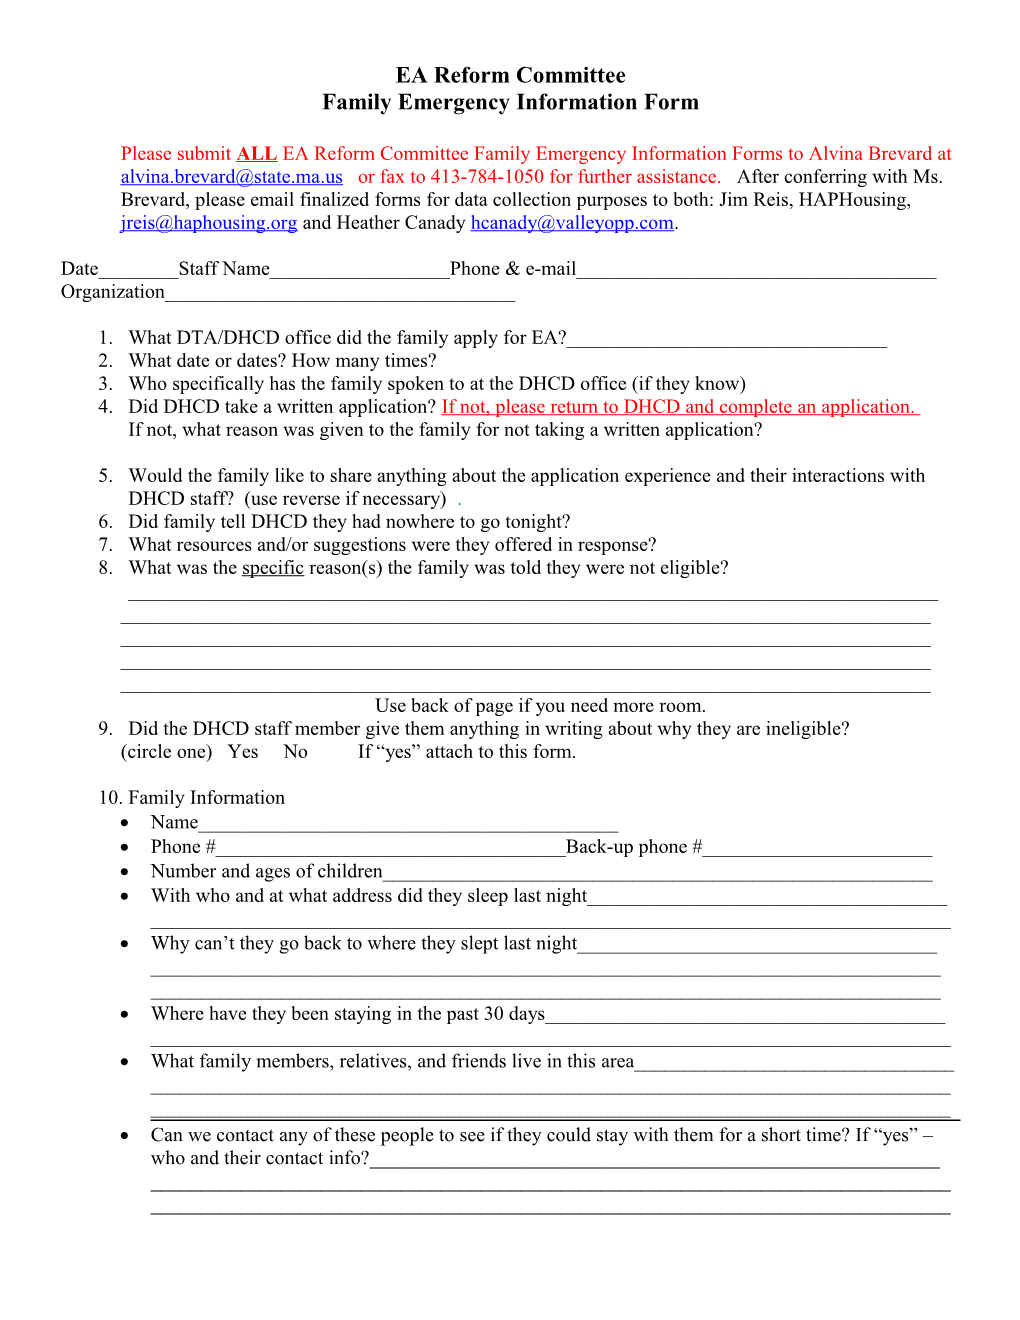 Family Emergency Information Form